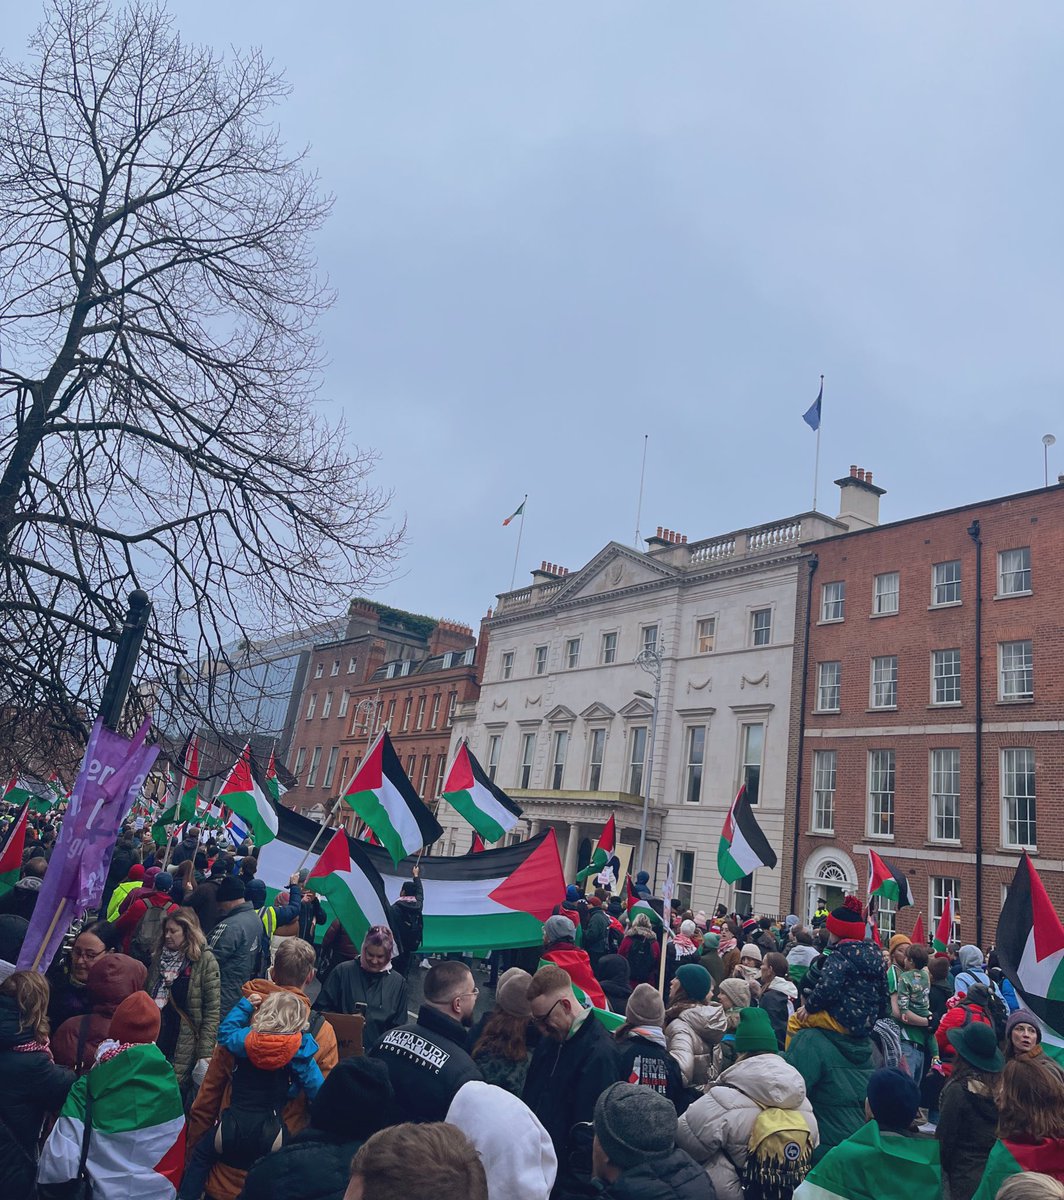 North men , South men, comrades all…. A great turnout in Dublin today in solidarity with the Palestinian people #EndTheGenocide #CeasefireForGaza